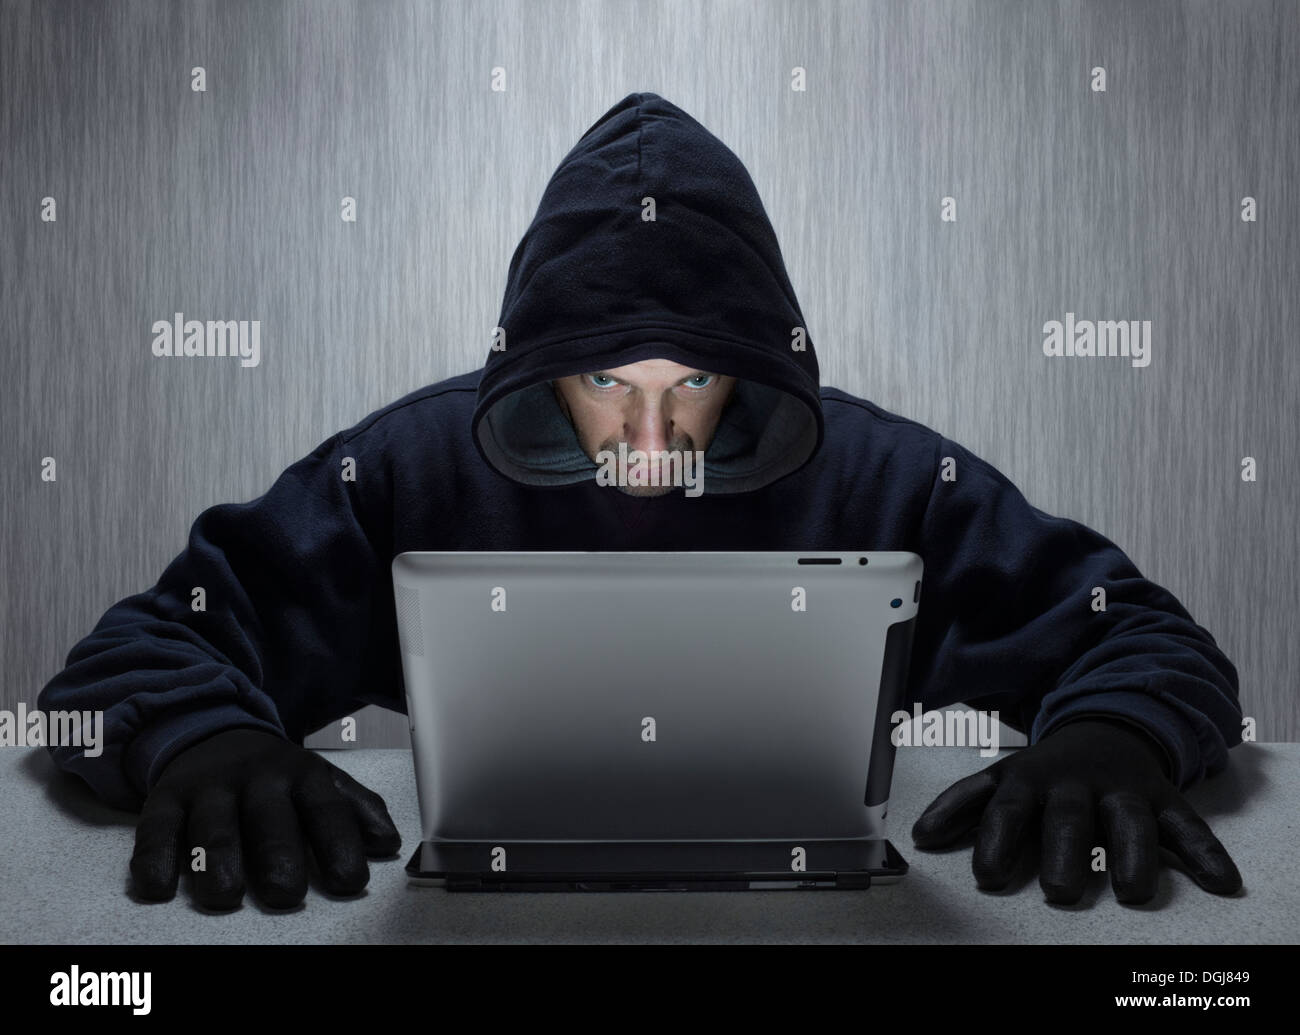 A hooded man representing a cyber criminal. Stock Photo